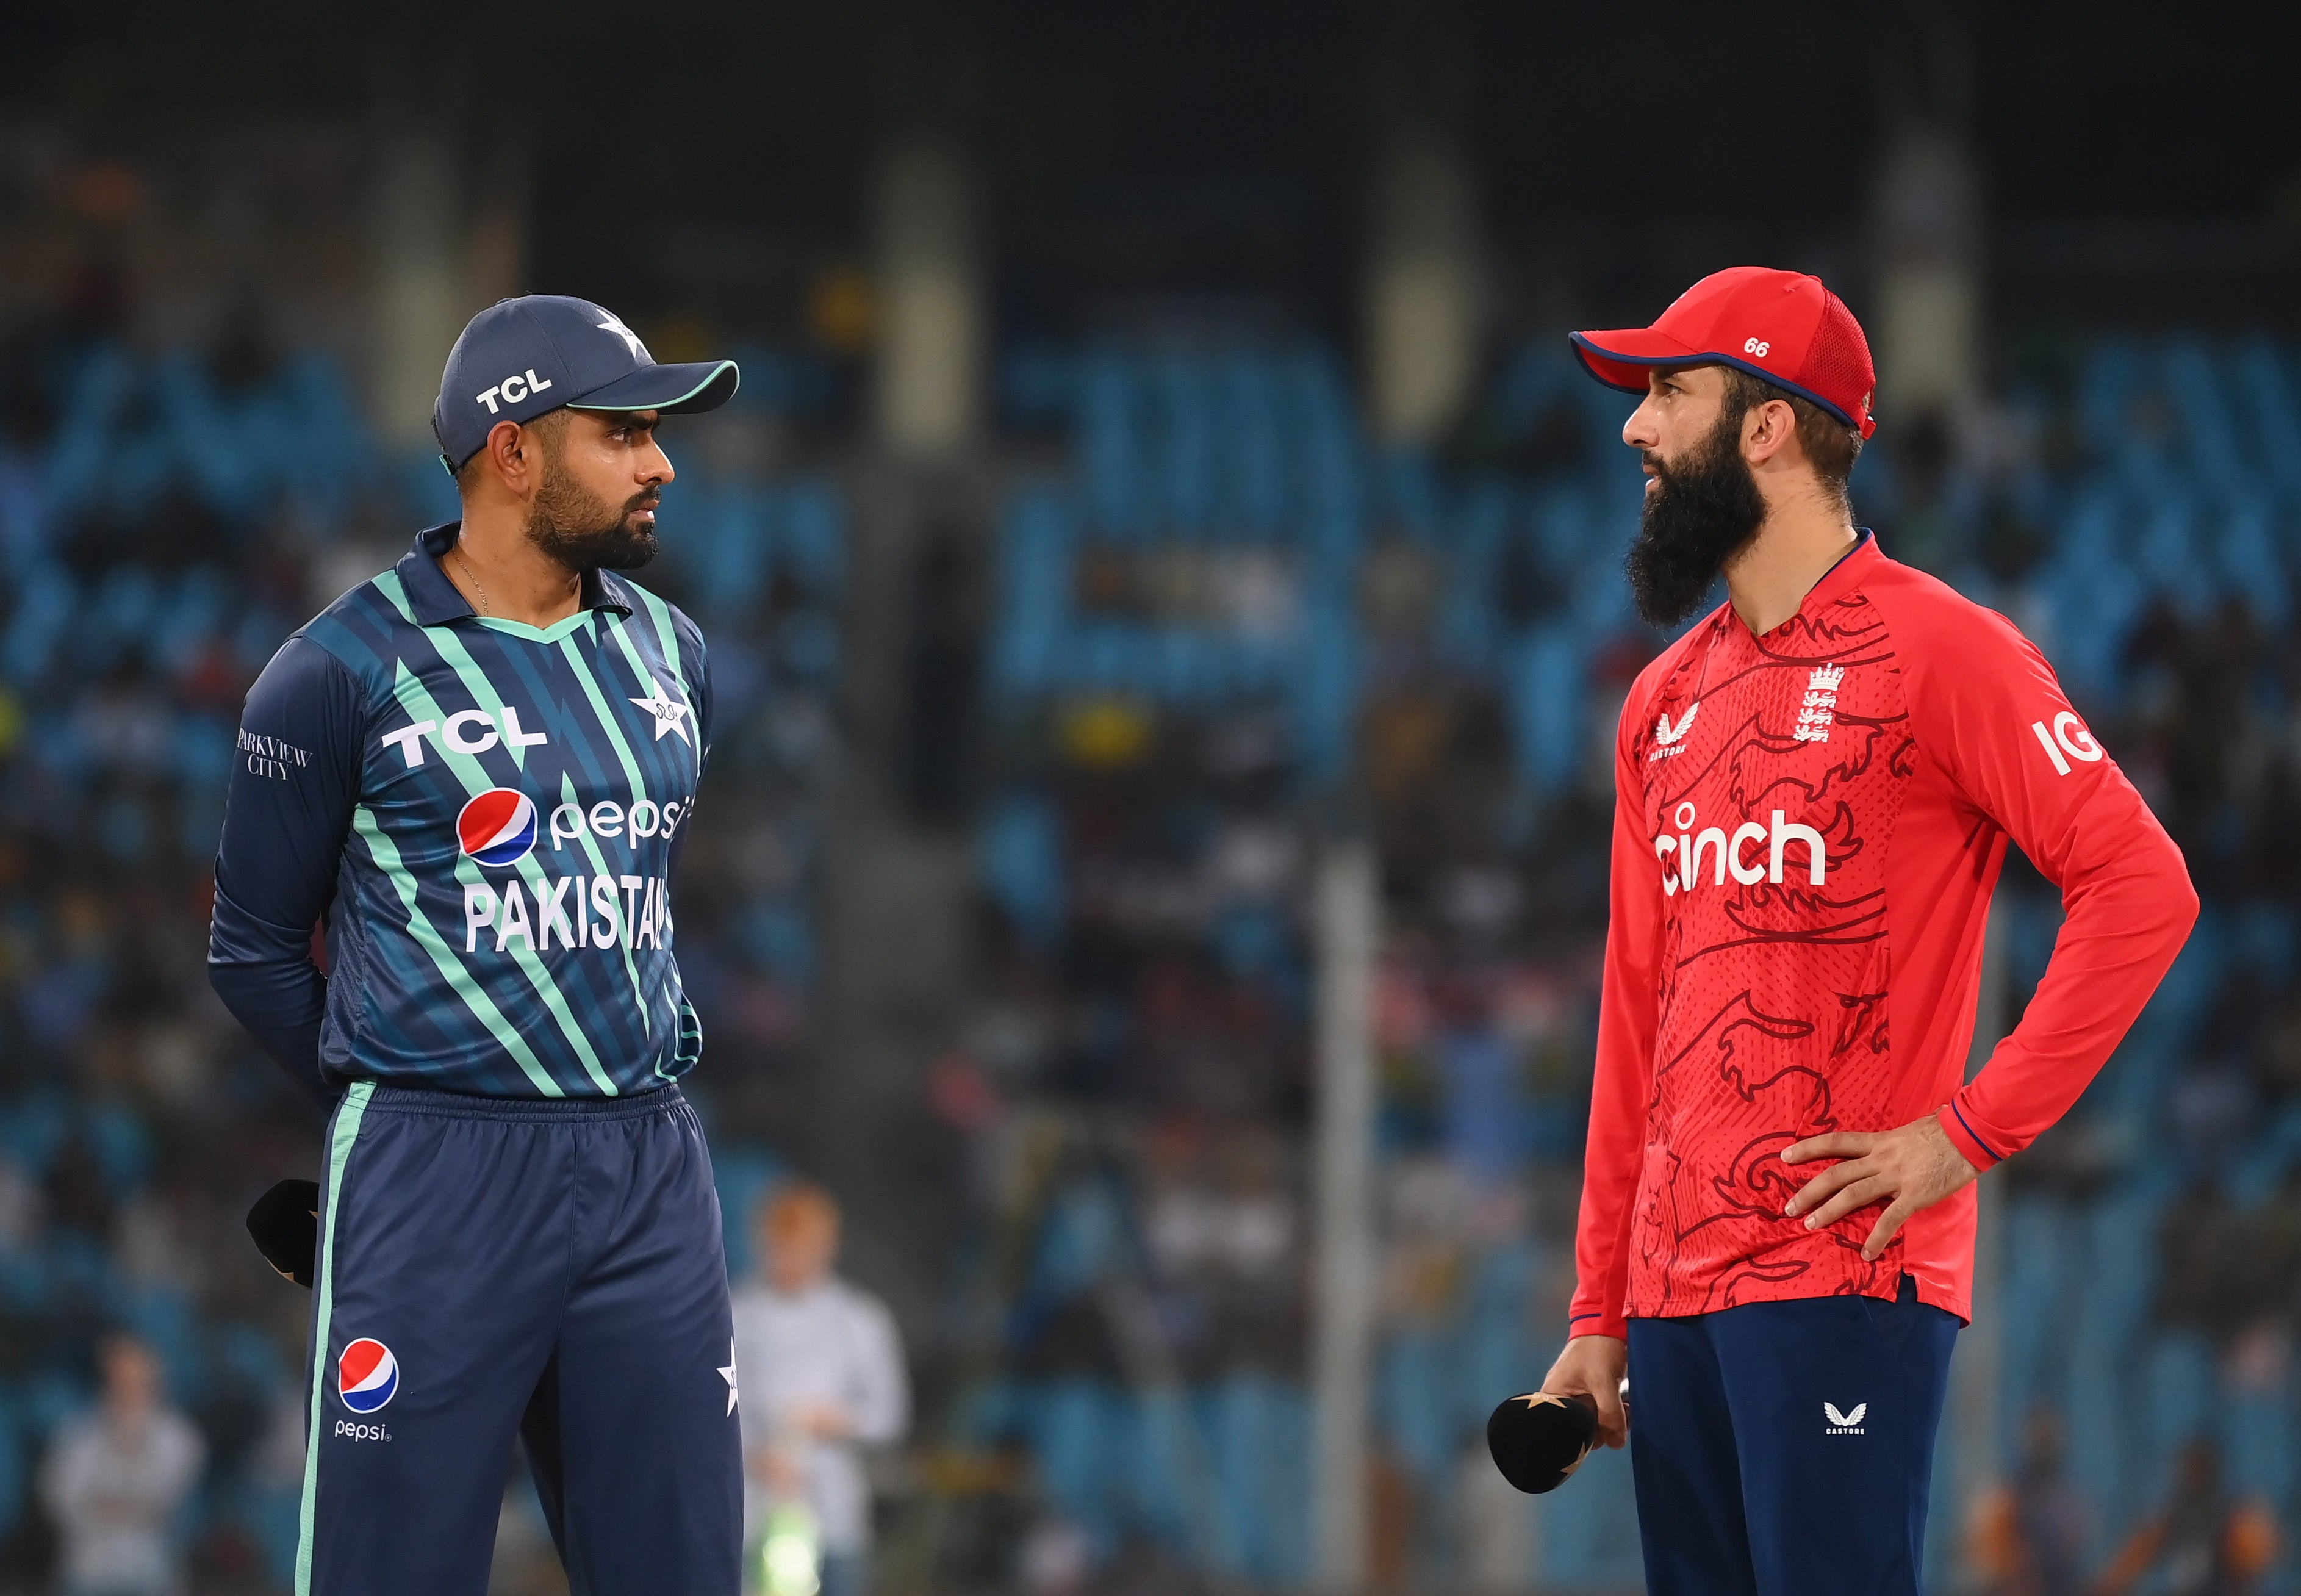 Moeen was England’s stand-in skipper for their recent T20 tour of Pakistan